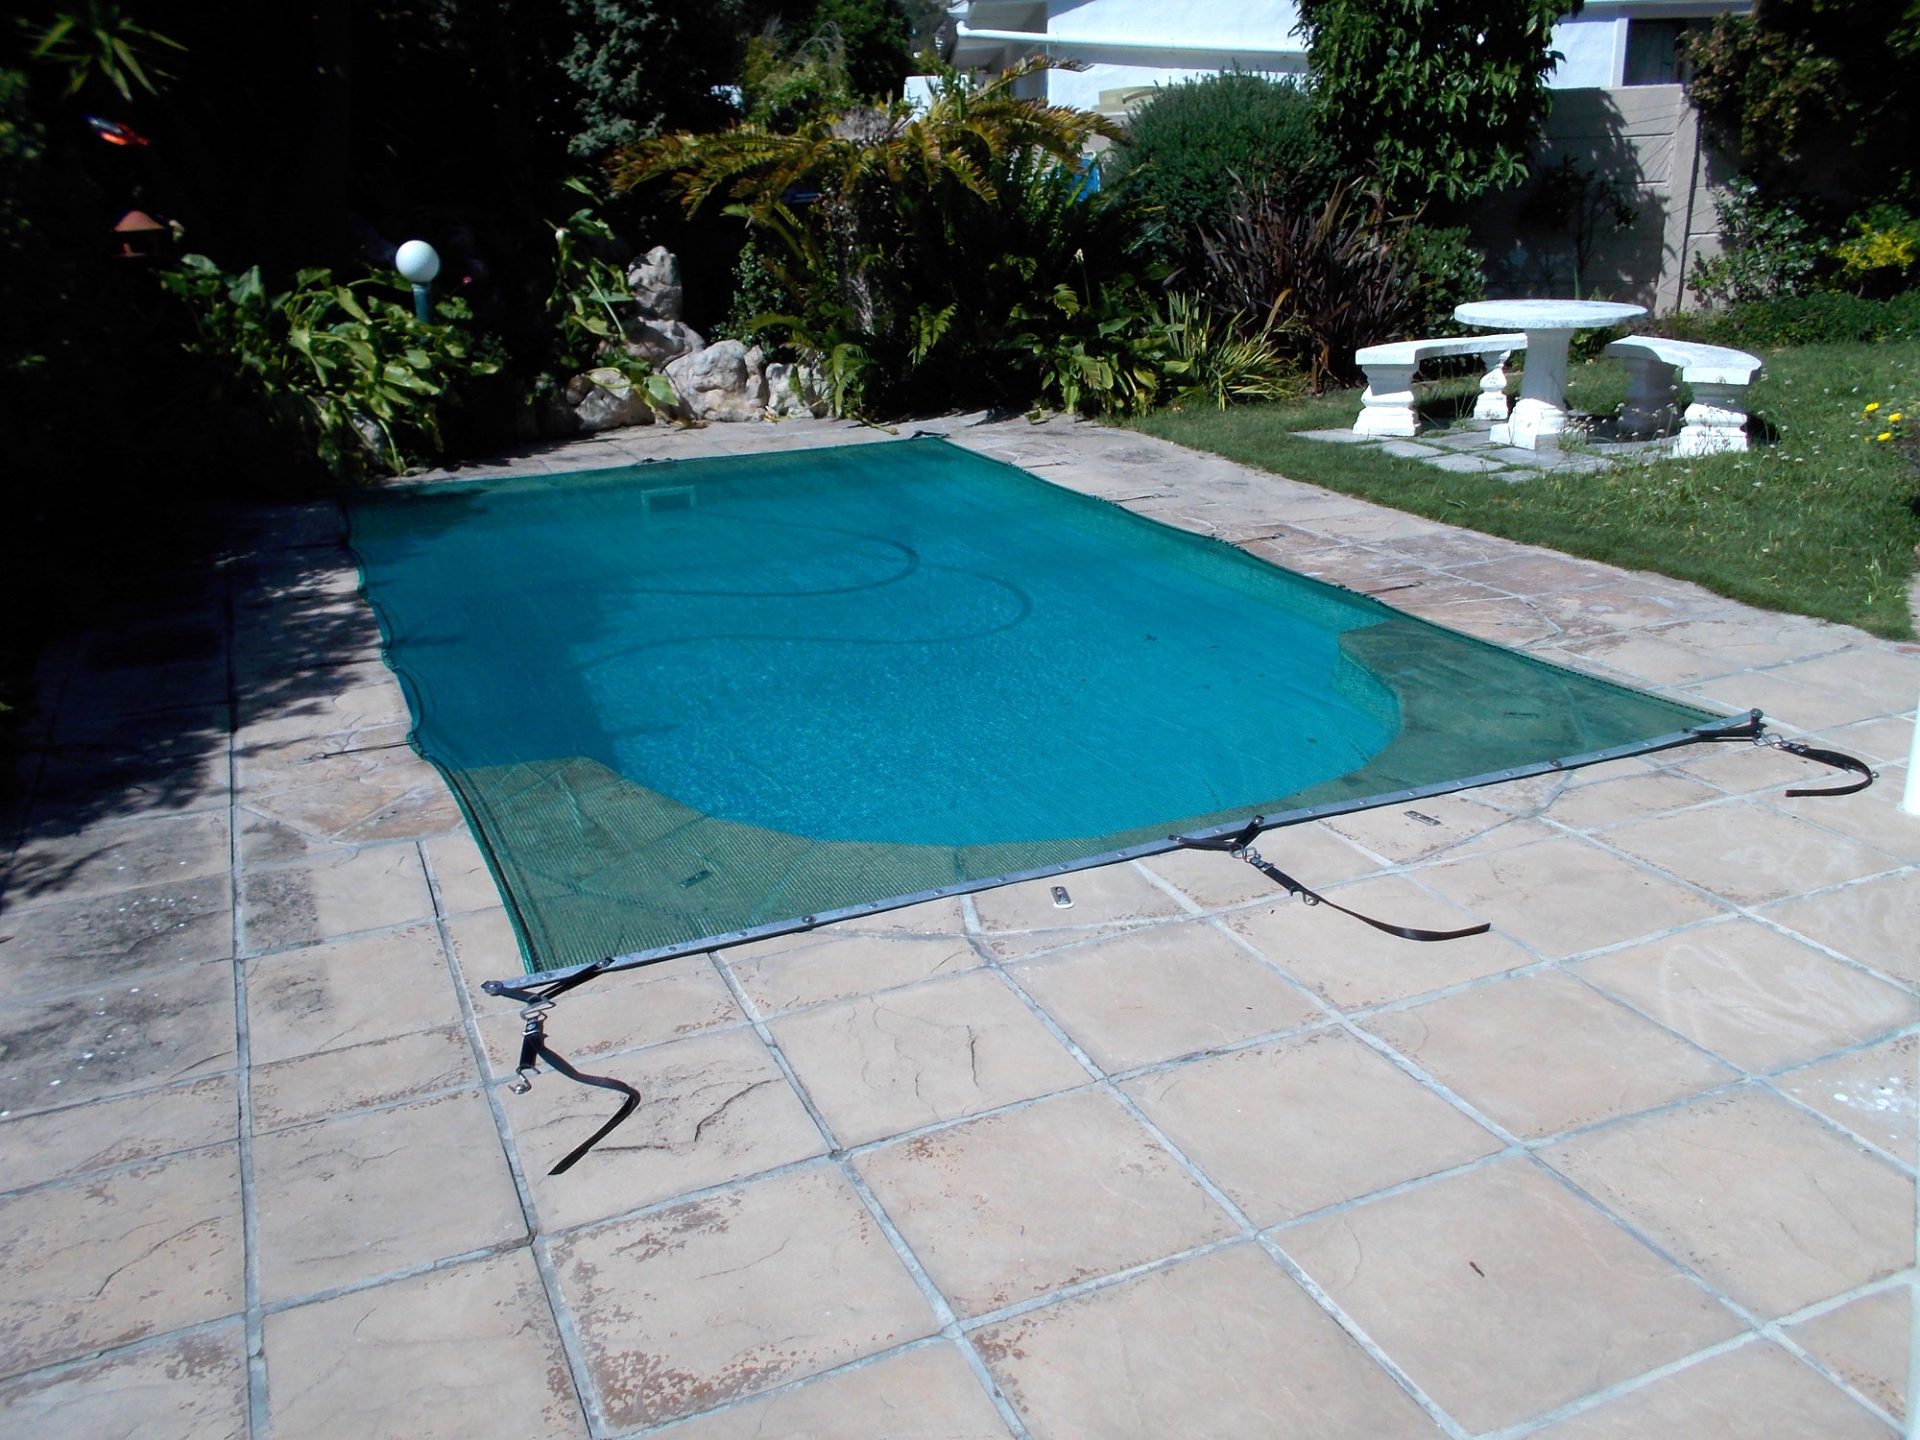 We supply and install shade net swimming pool covers